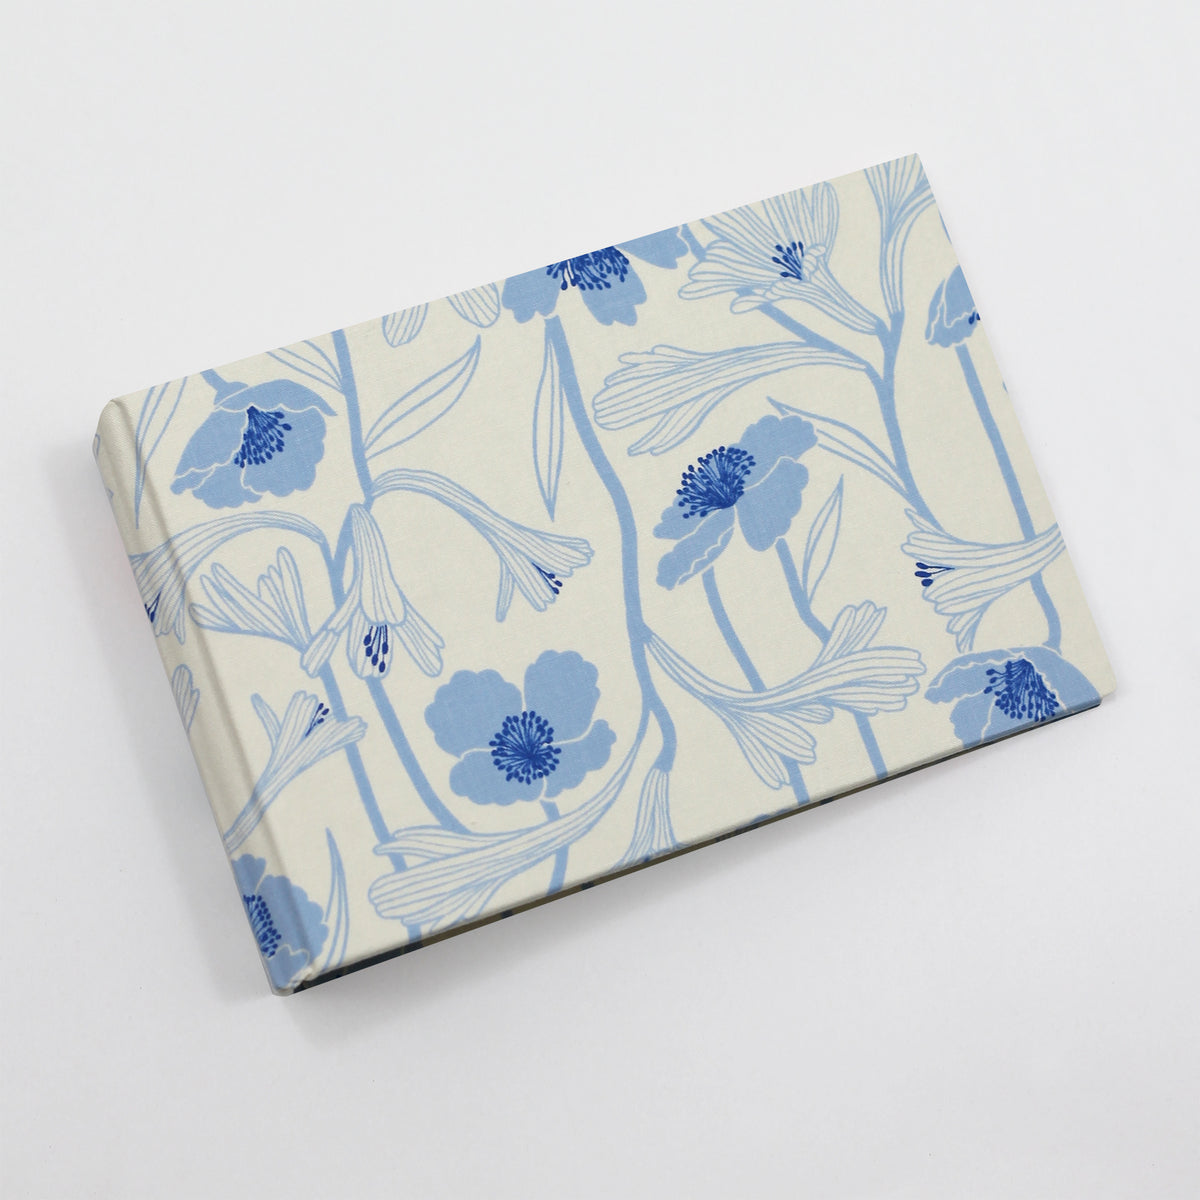 Small Photo Binder | for 4x6 Photos | Limited Edition Cover: Water Flowers White